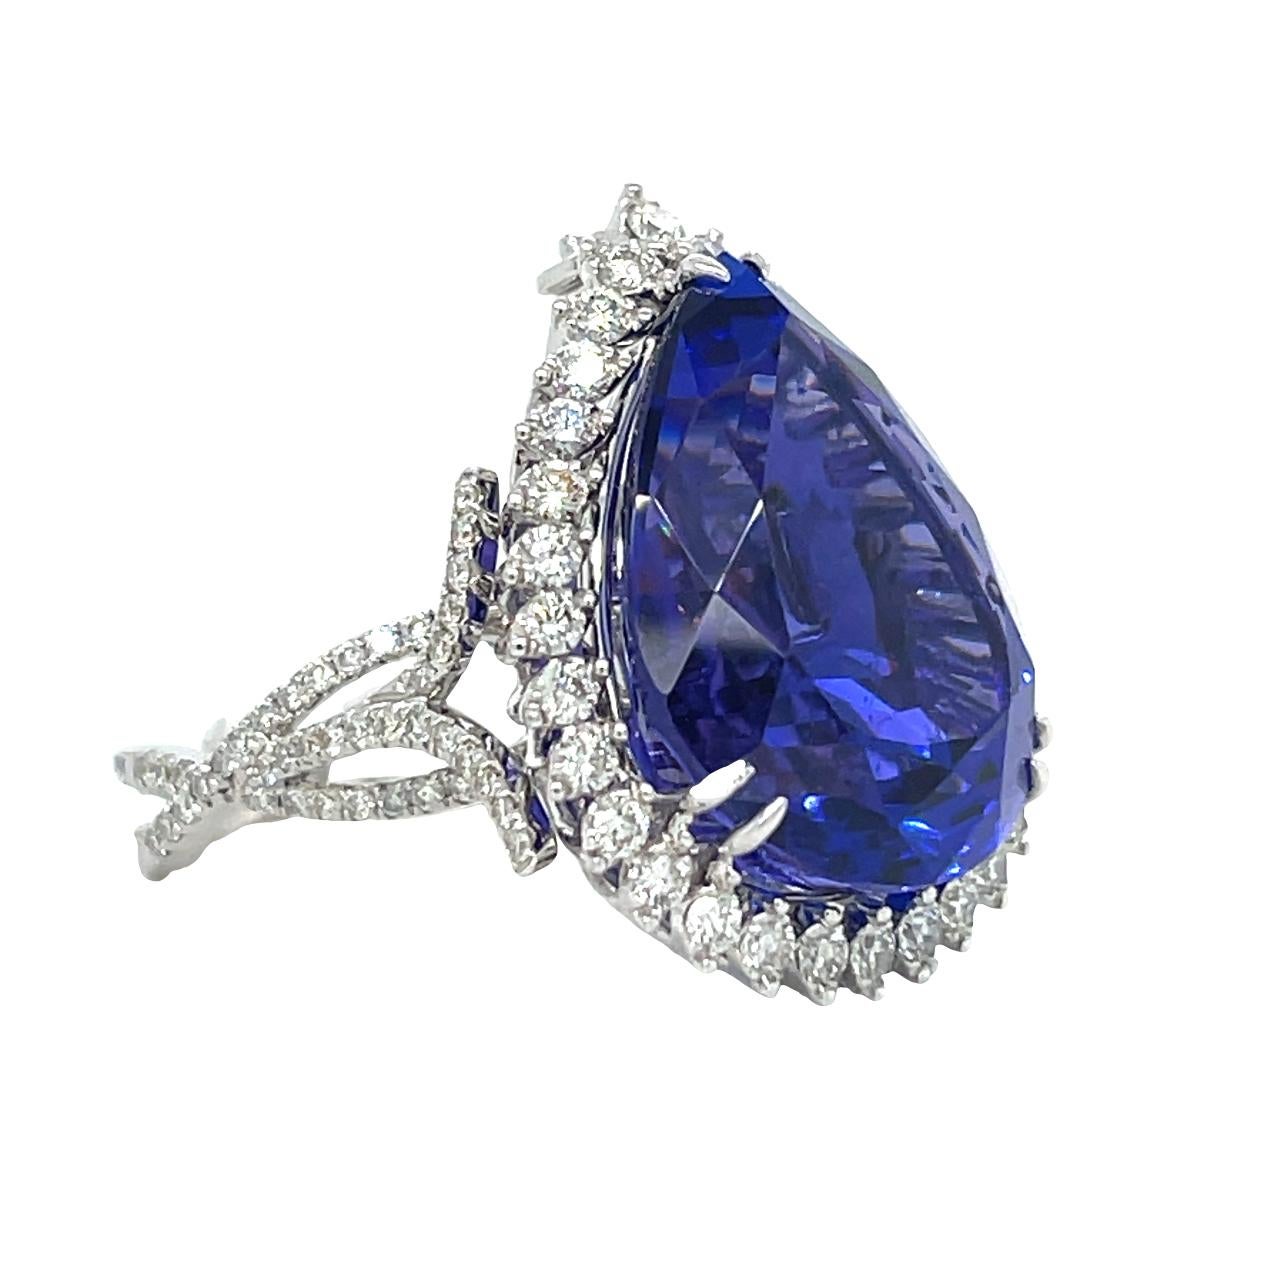 This stunning ring has a deep colored 20x15 mm pear shape AAA quality Tanzanite with 6 prong setting set in 18kt white gold. There top quality brilliant cut diamonds surrounding the center stone and along the fancy shaped shank. This ring comes in a